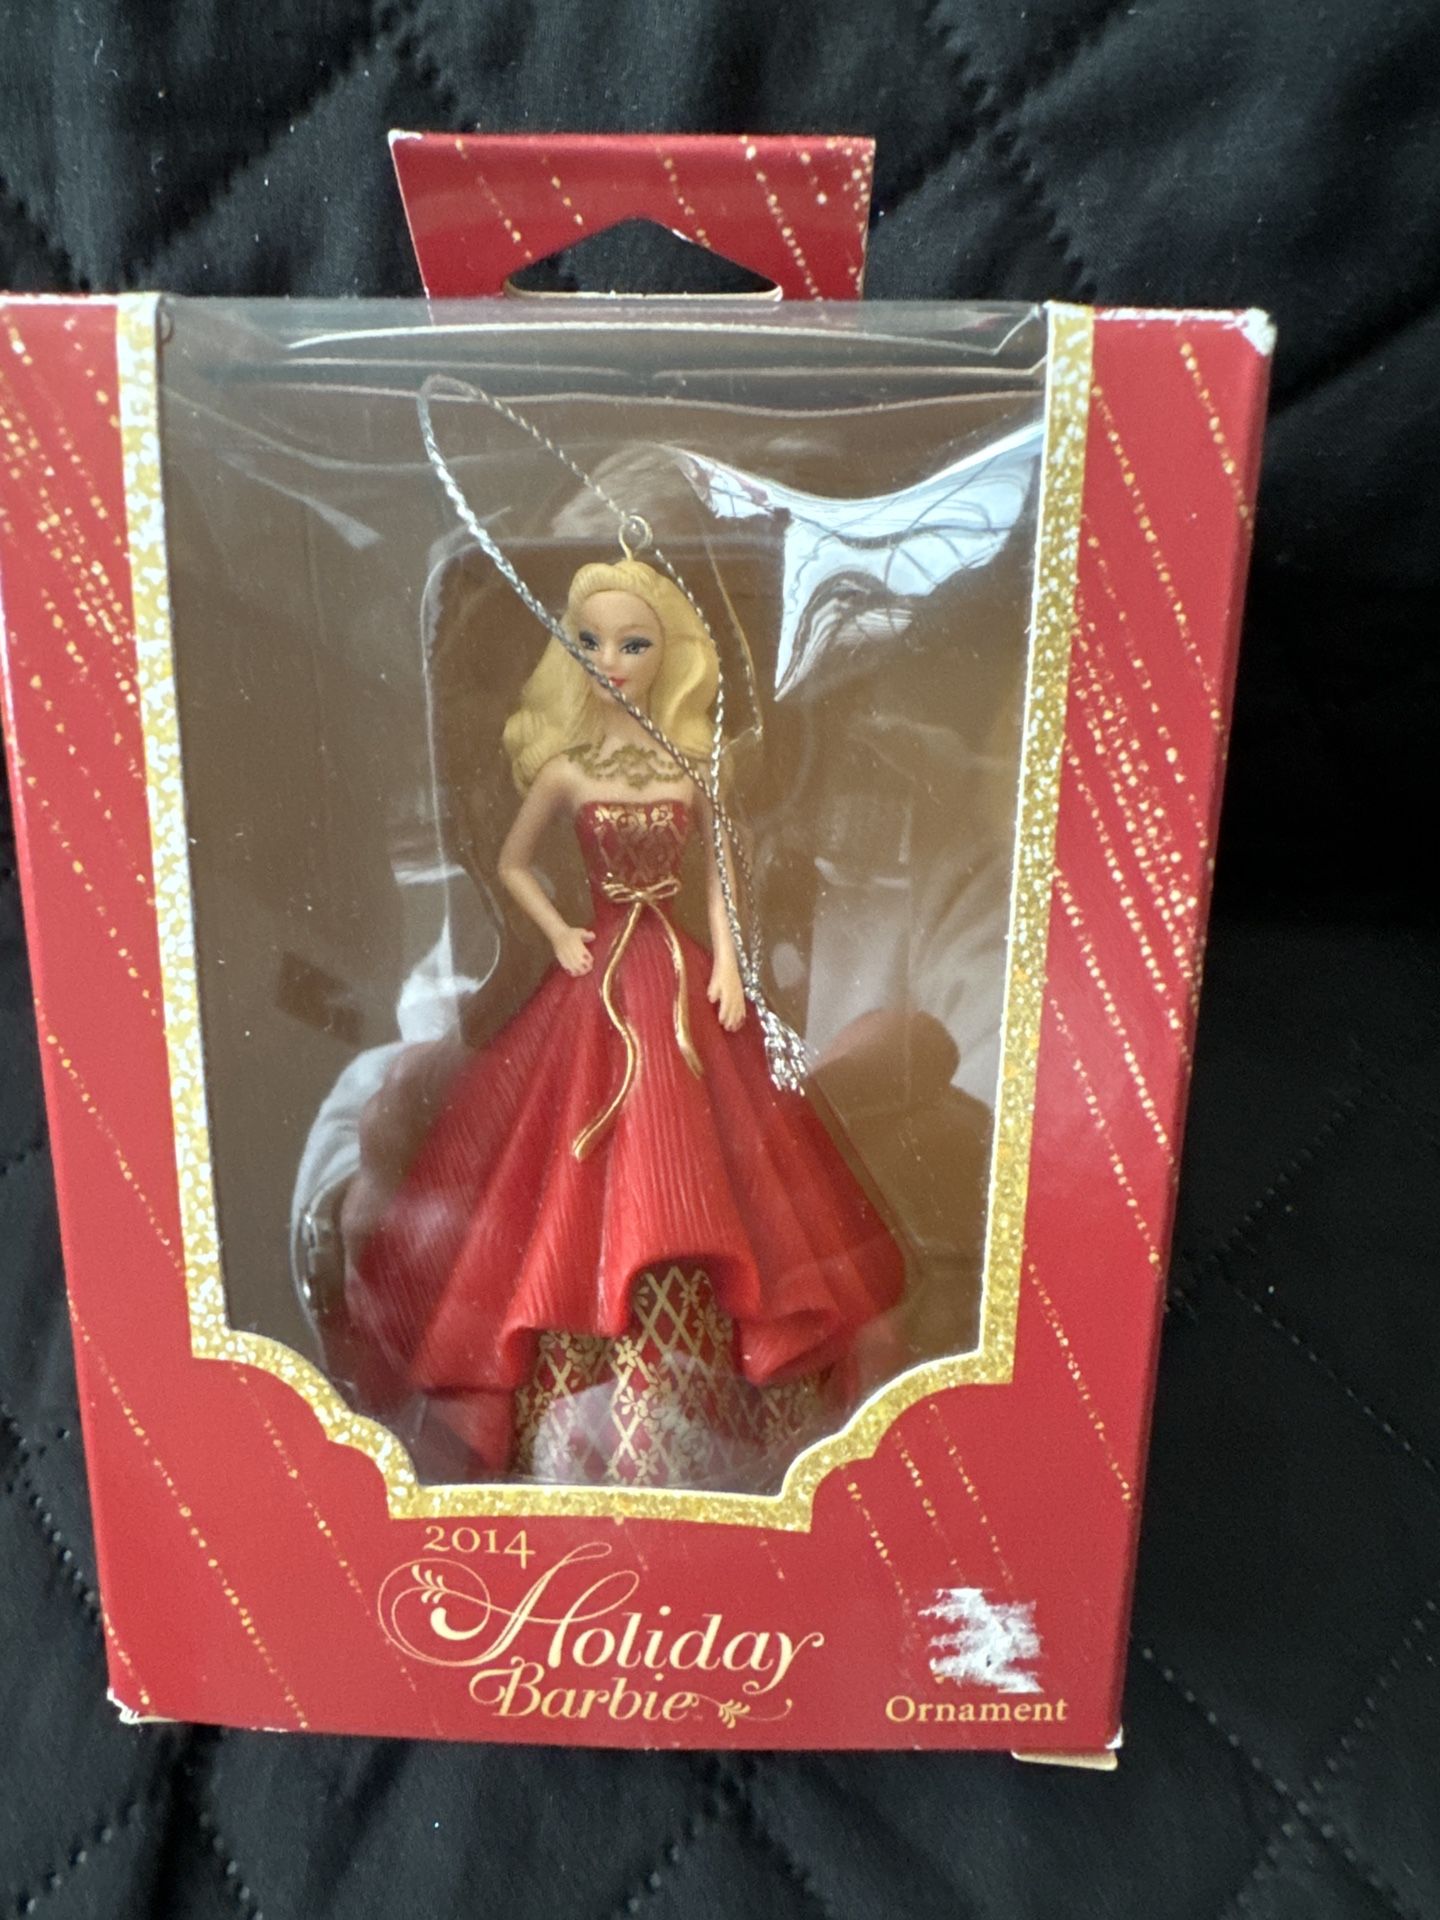 Holiday, Barbie ornaments